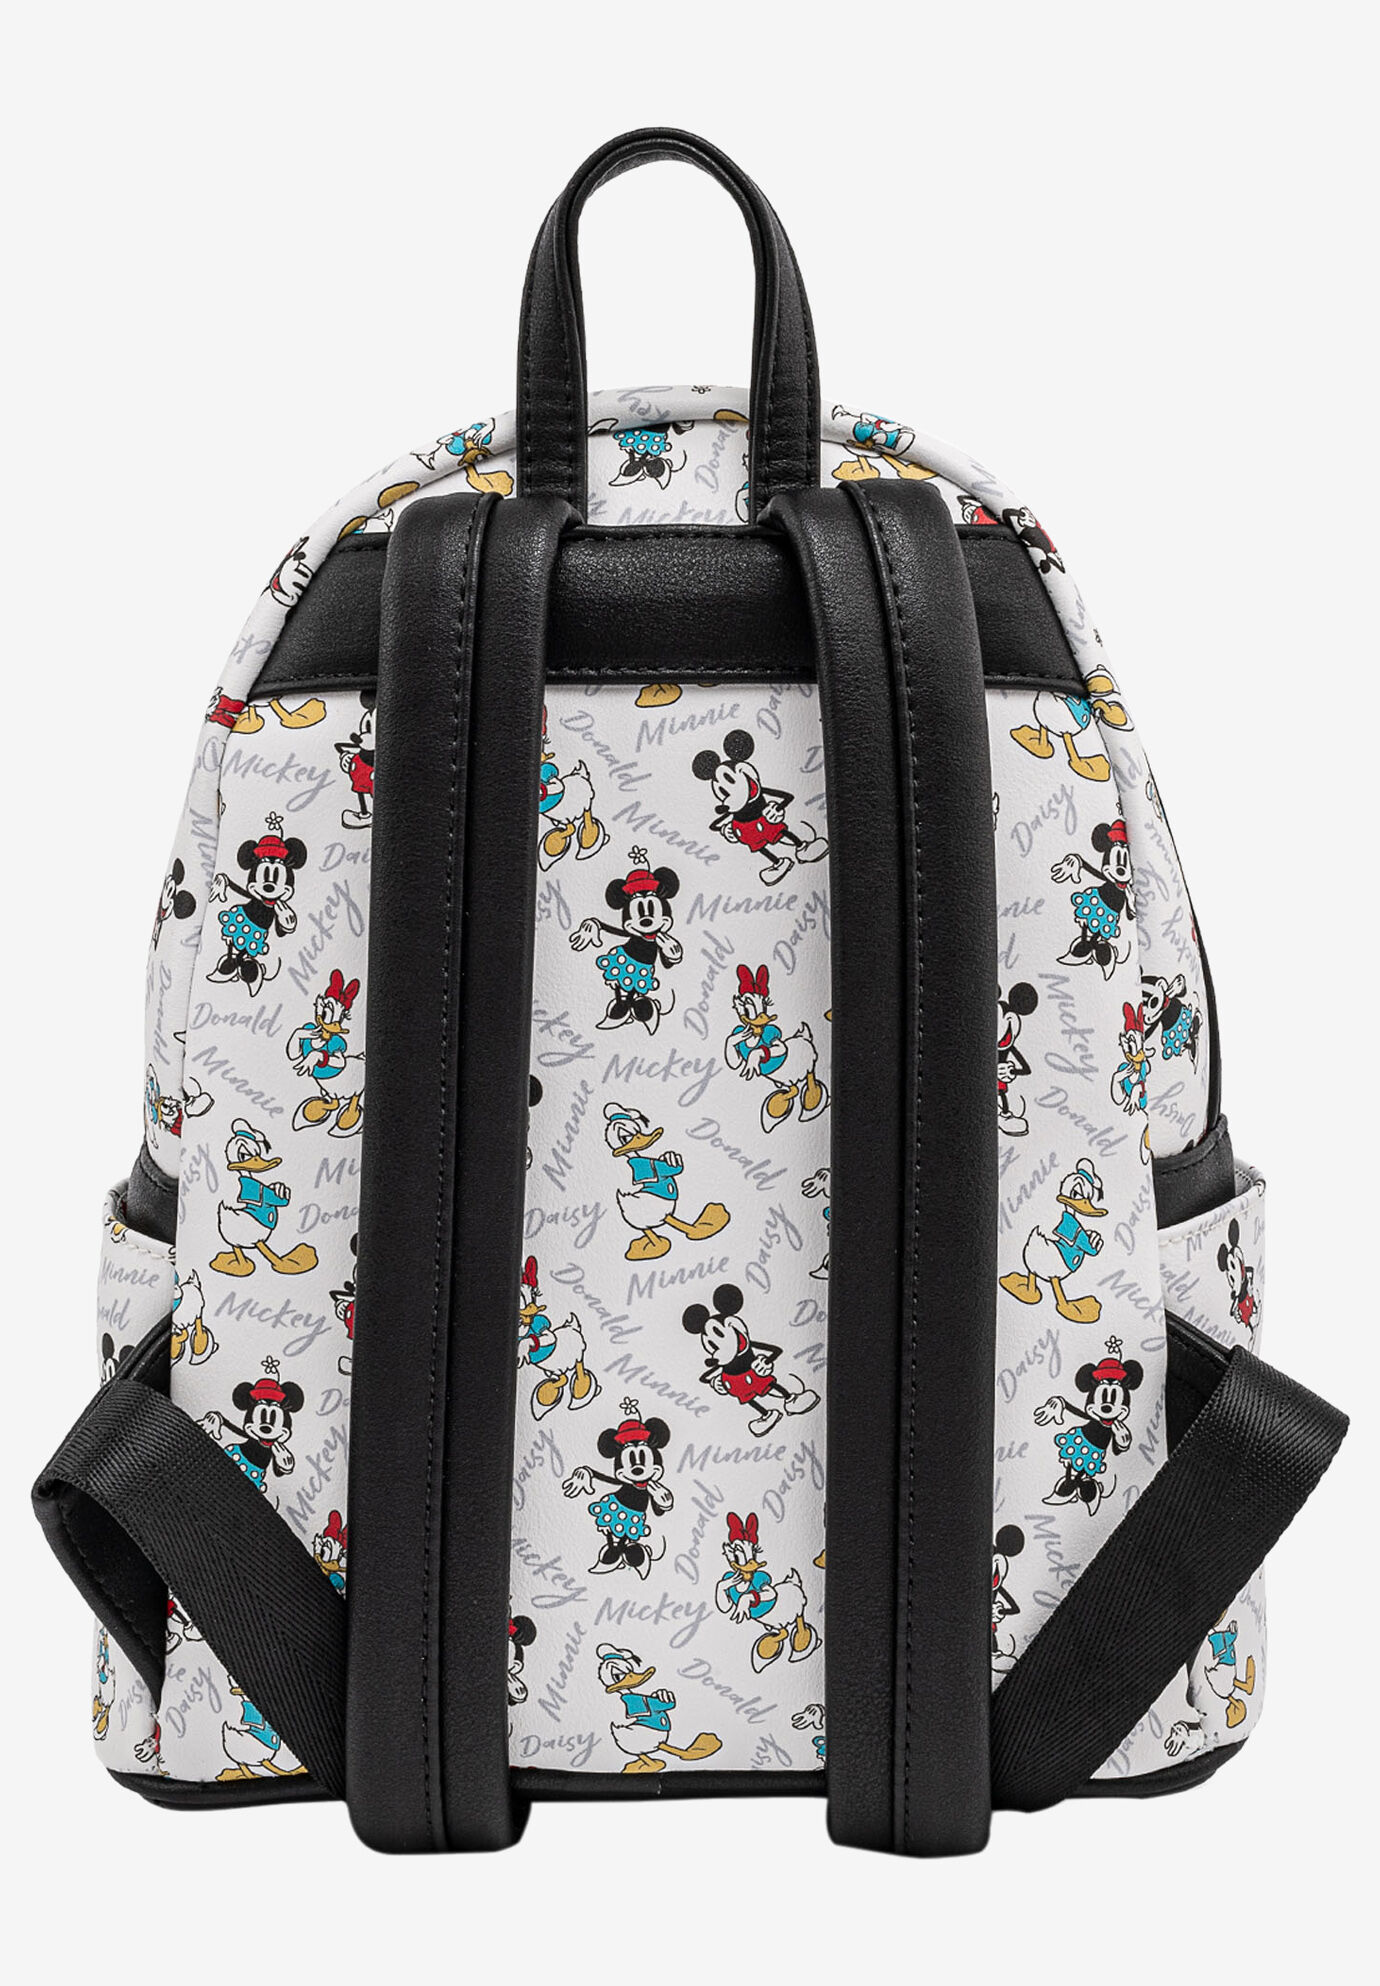 Loungefly Mini Backpack- Minnie Mouse Magenta Sequin - Walmart.com